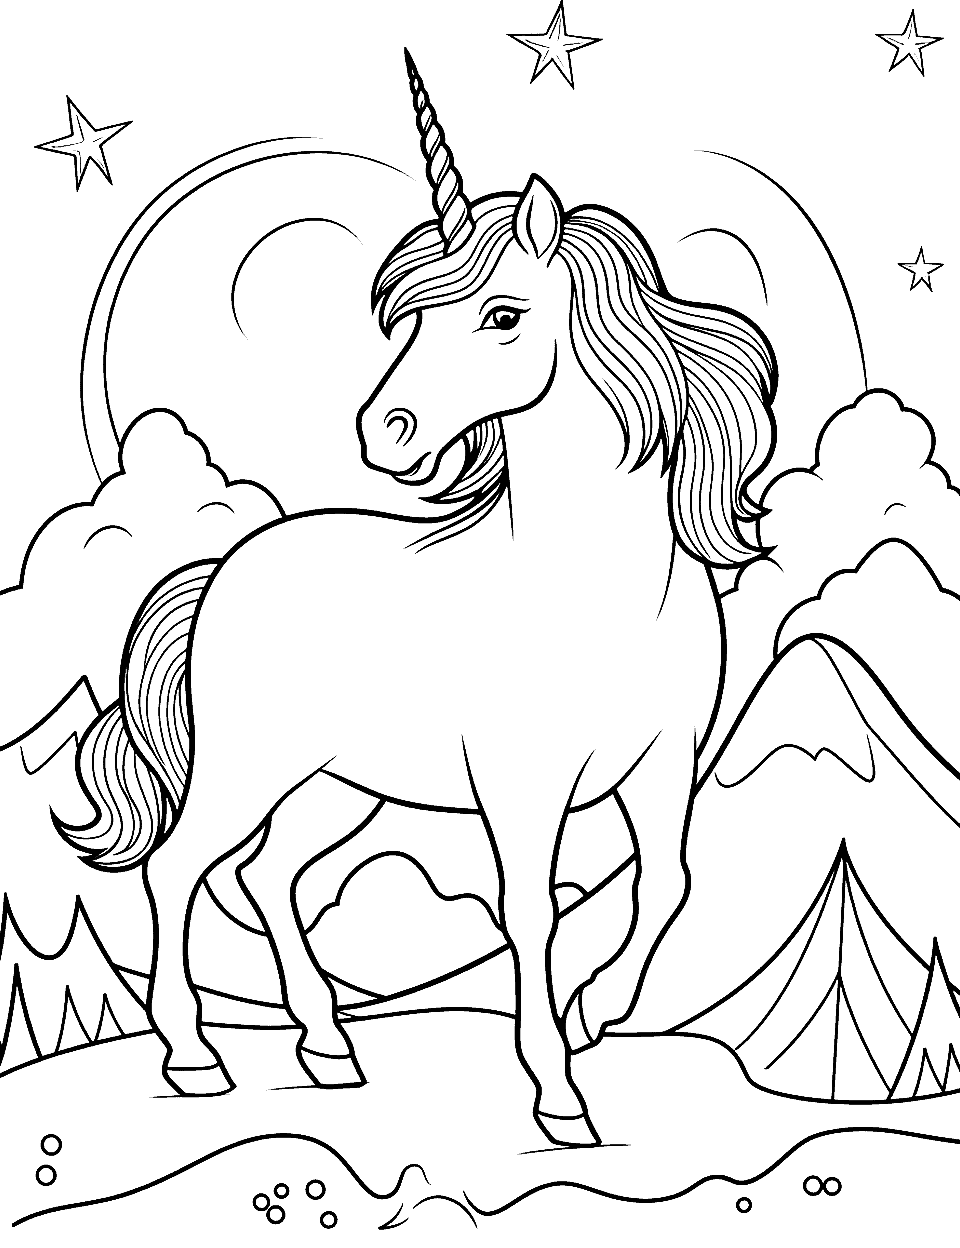 Unicorn and Mountains Coloring Page - A unicorn with large snowy mountains in the background.